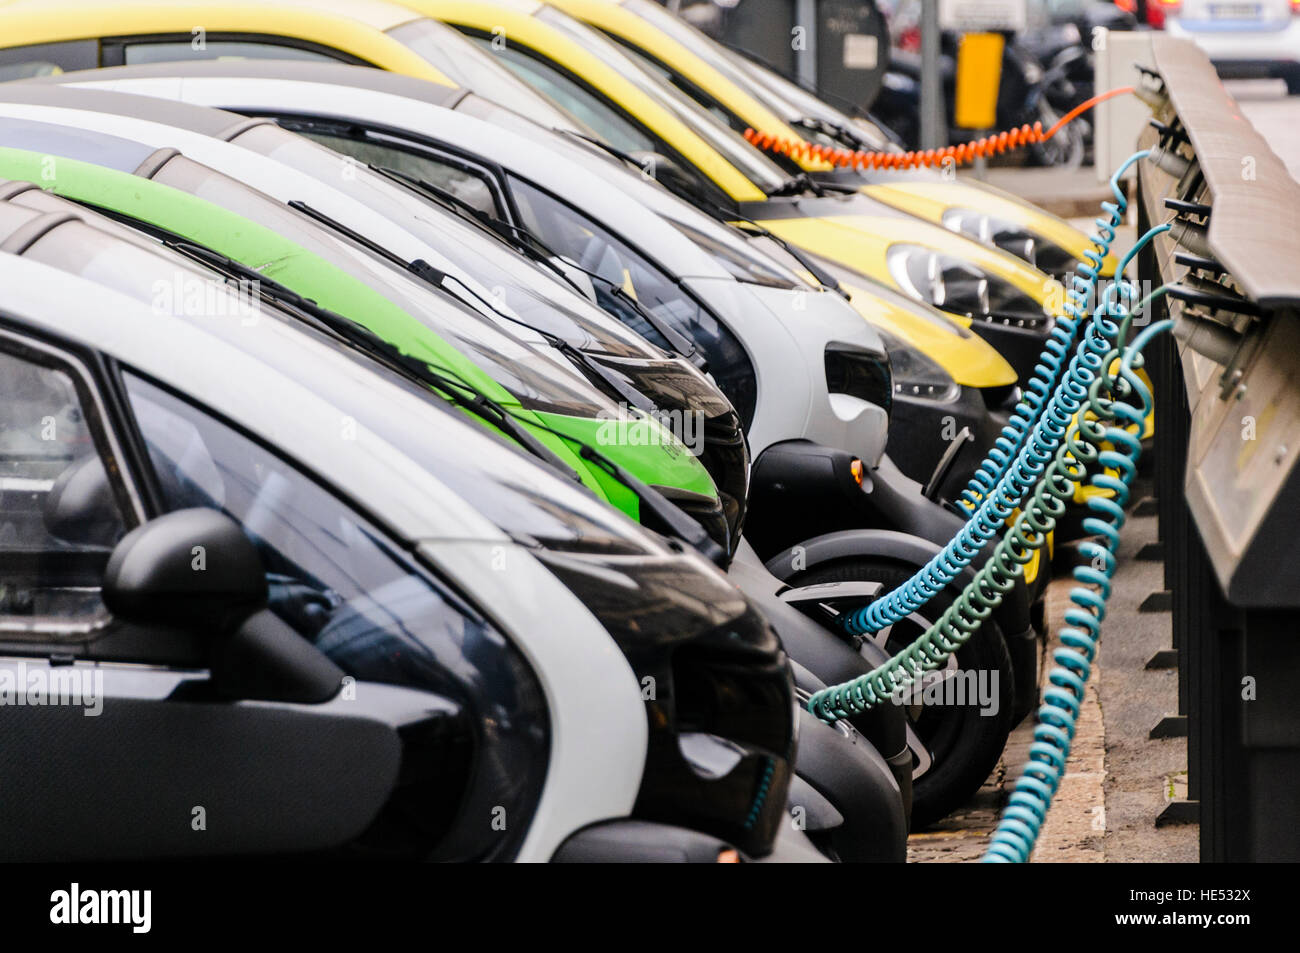 A number of Renault Twizy two seater city vehicles lined up at a charging station. Stock Photo